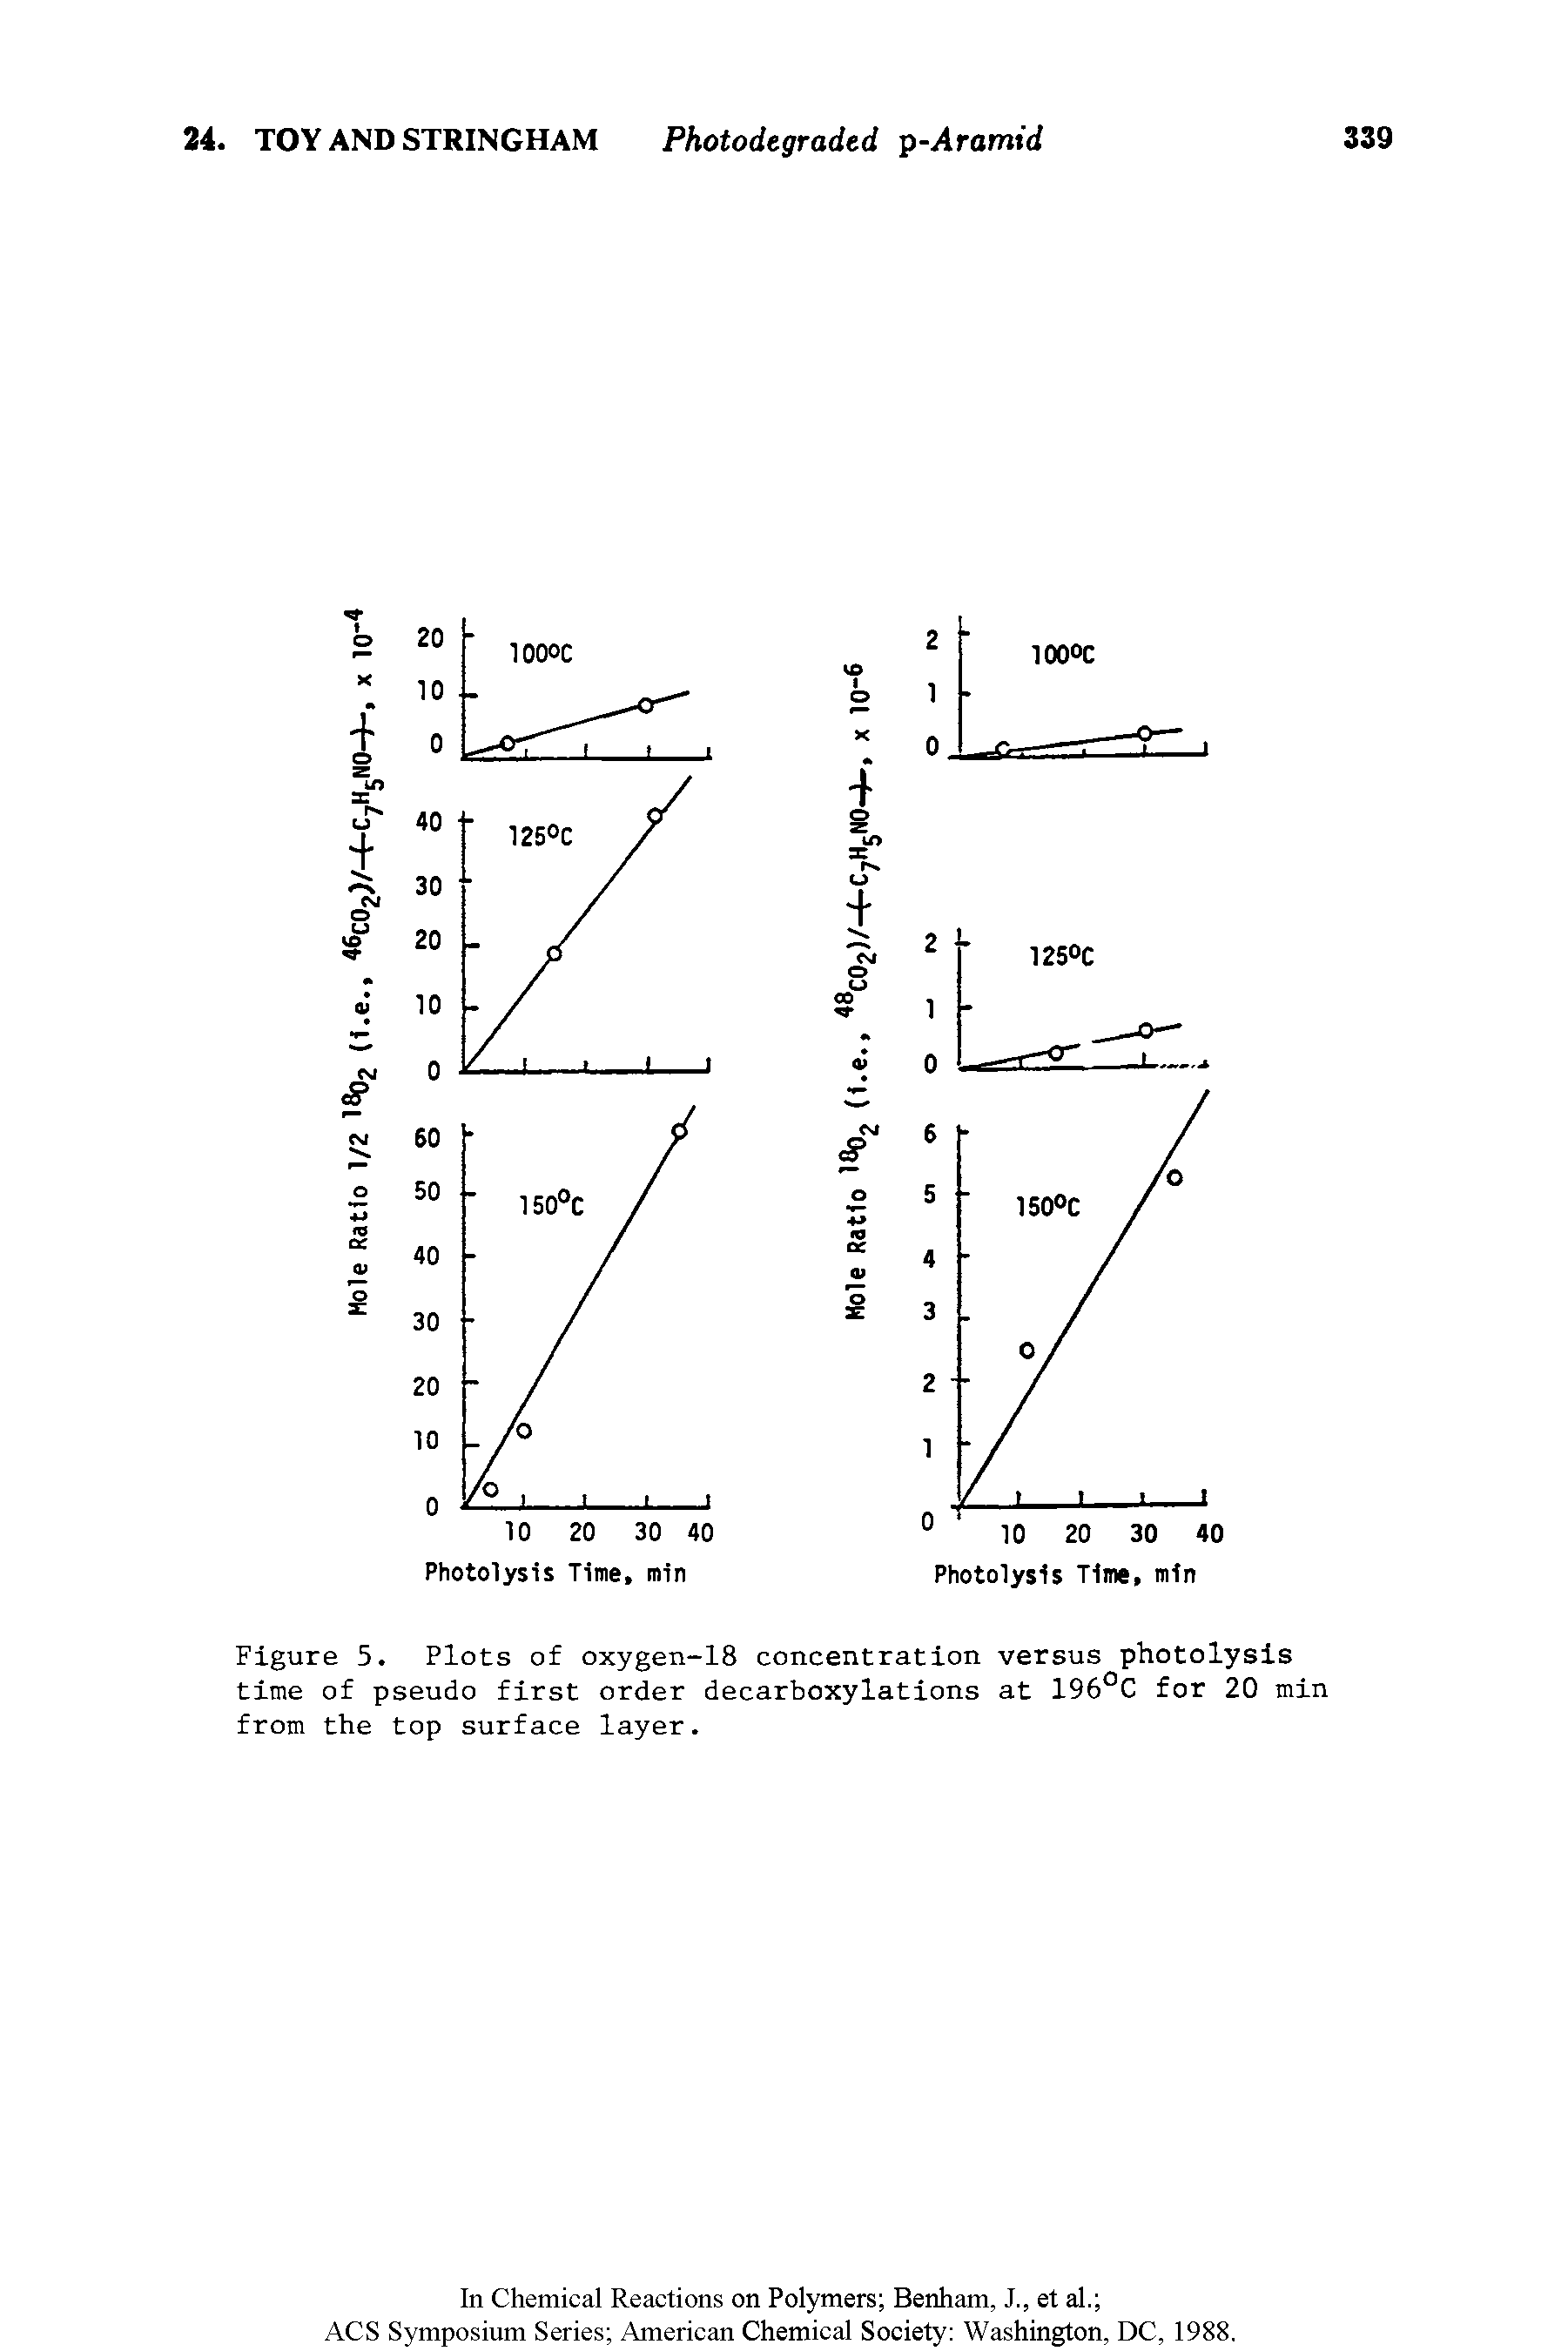 Figure 5. Plots of oxygen-18 concentration versus photolysis time of pseudo first order decarboxylations at 196°C for 20 min from the top surface layer.